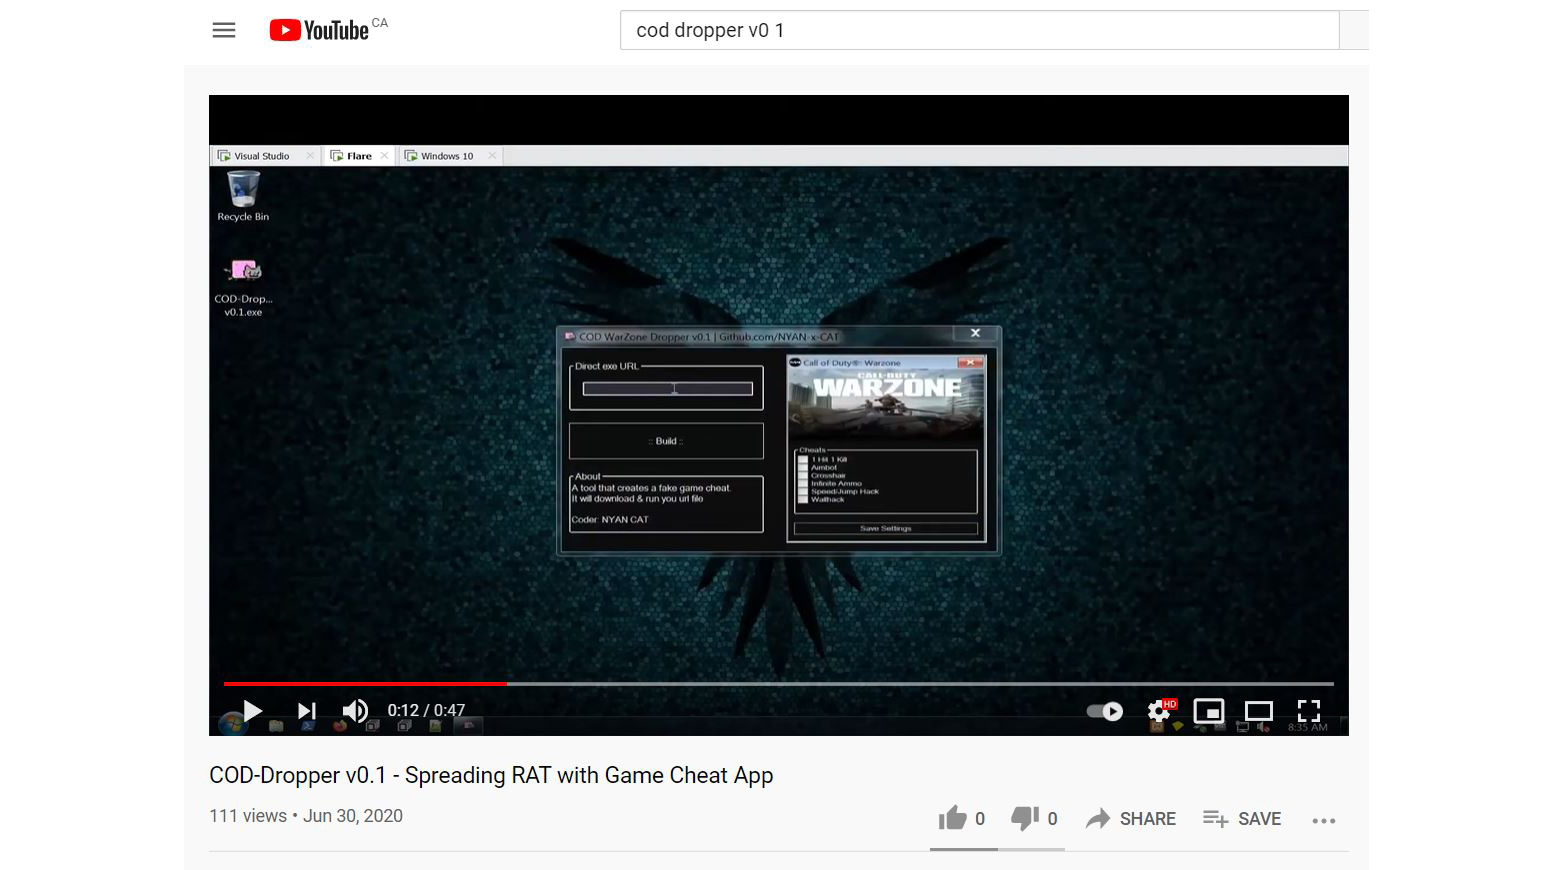 Screenshot of video promoting the malware on YouTube